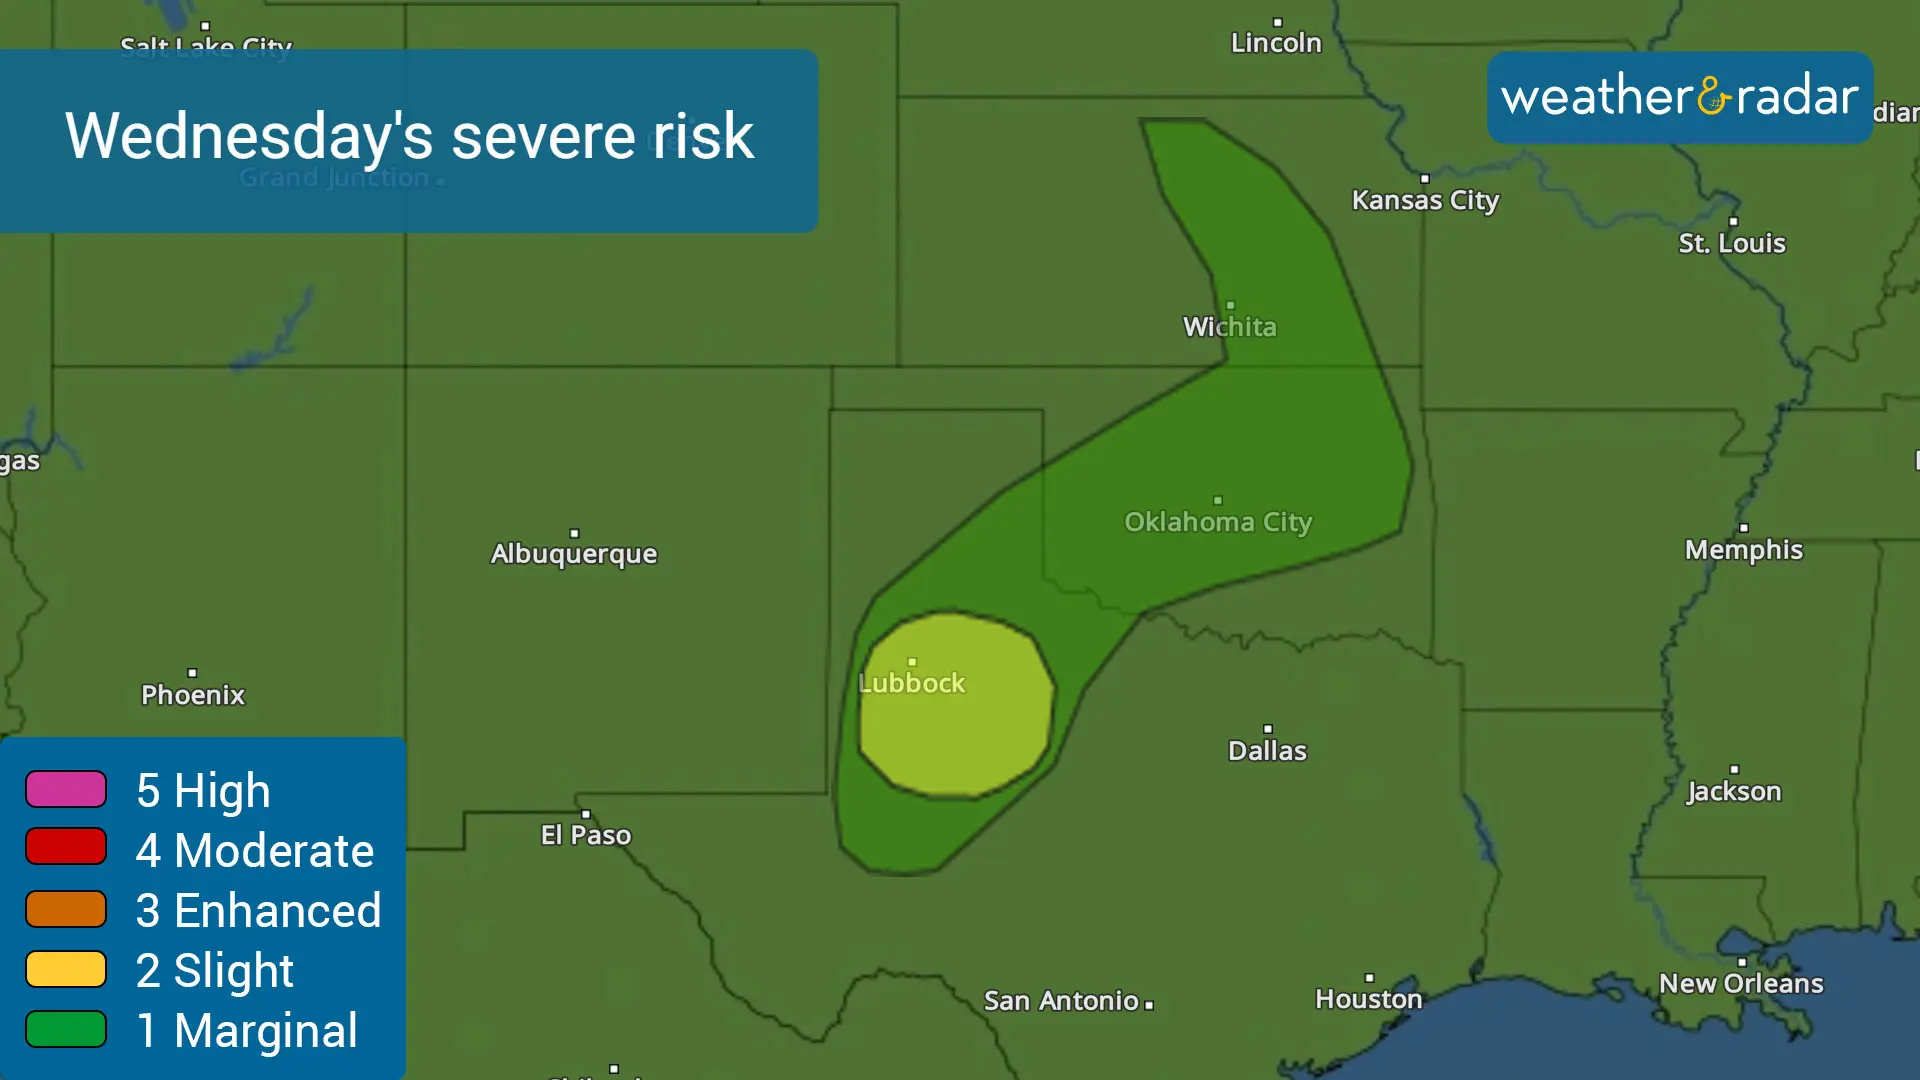 Severe storms will affect the Texas Panhandle and parts of Oklahoma.